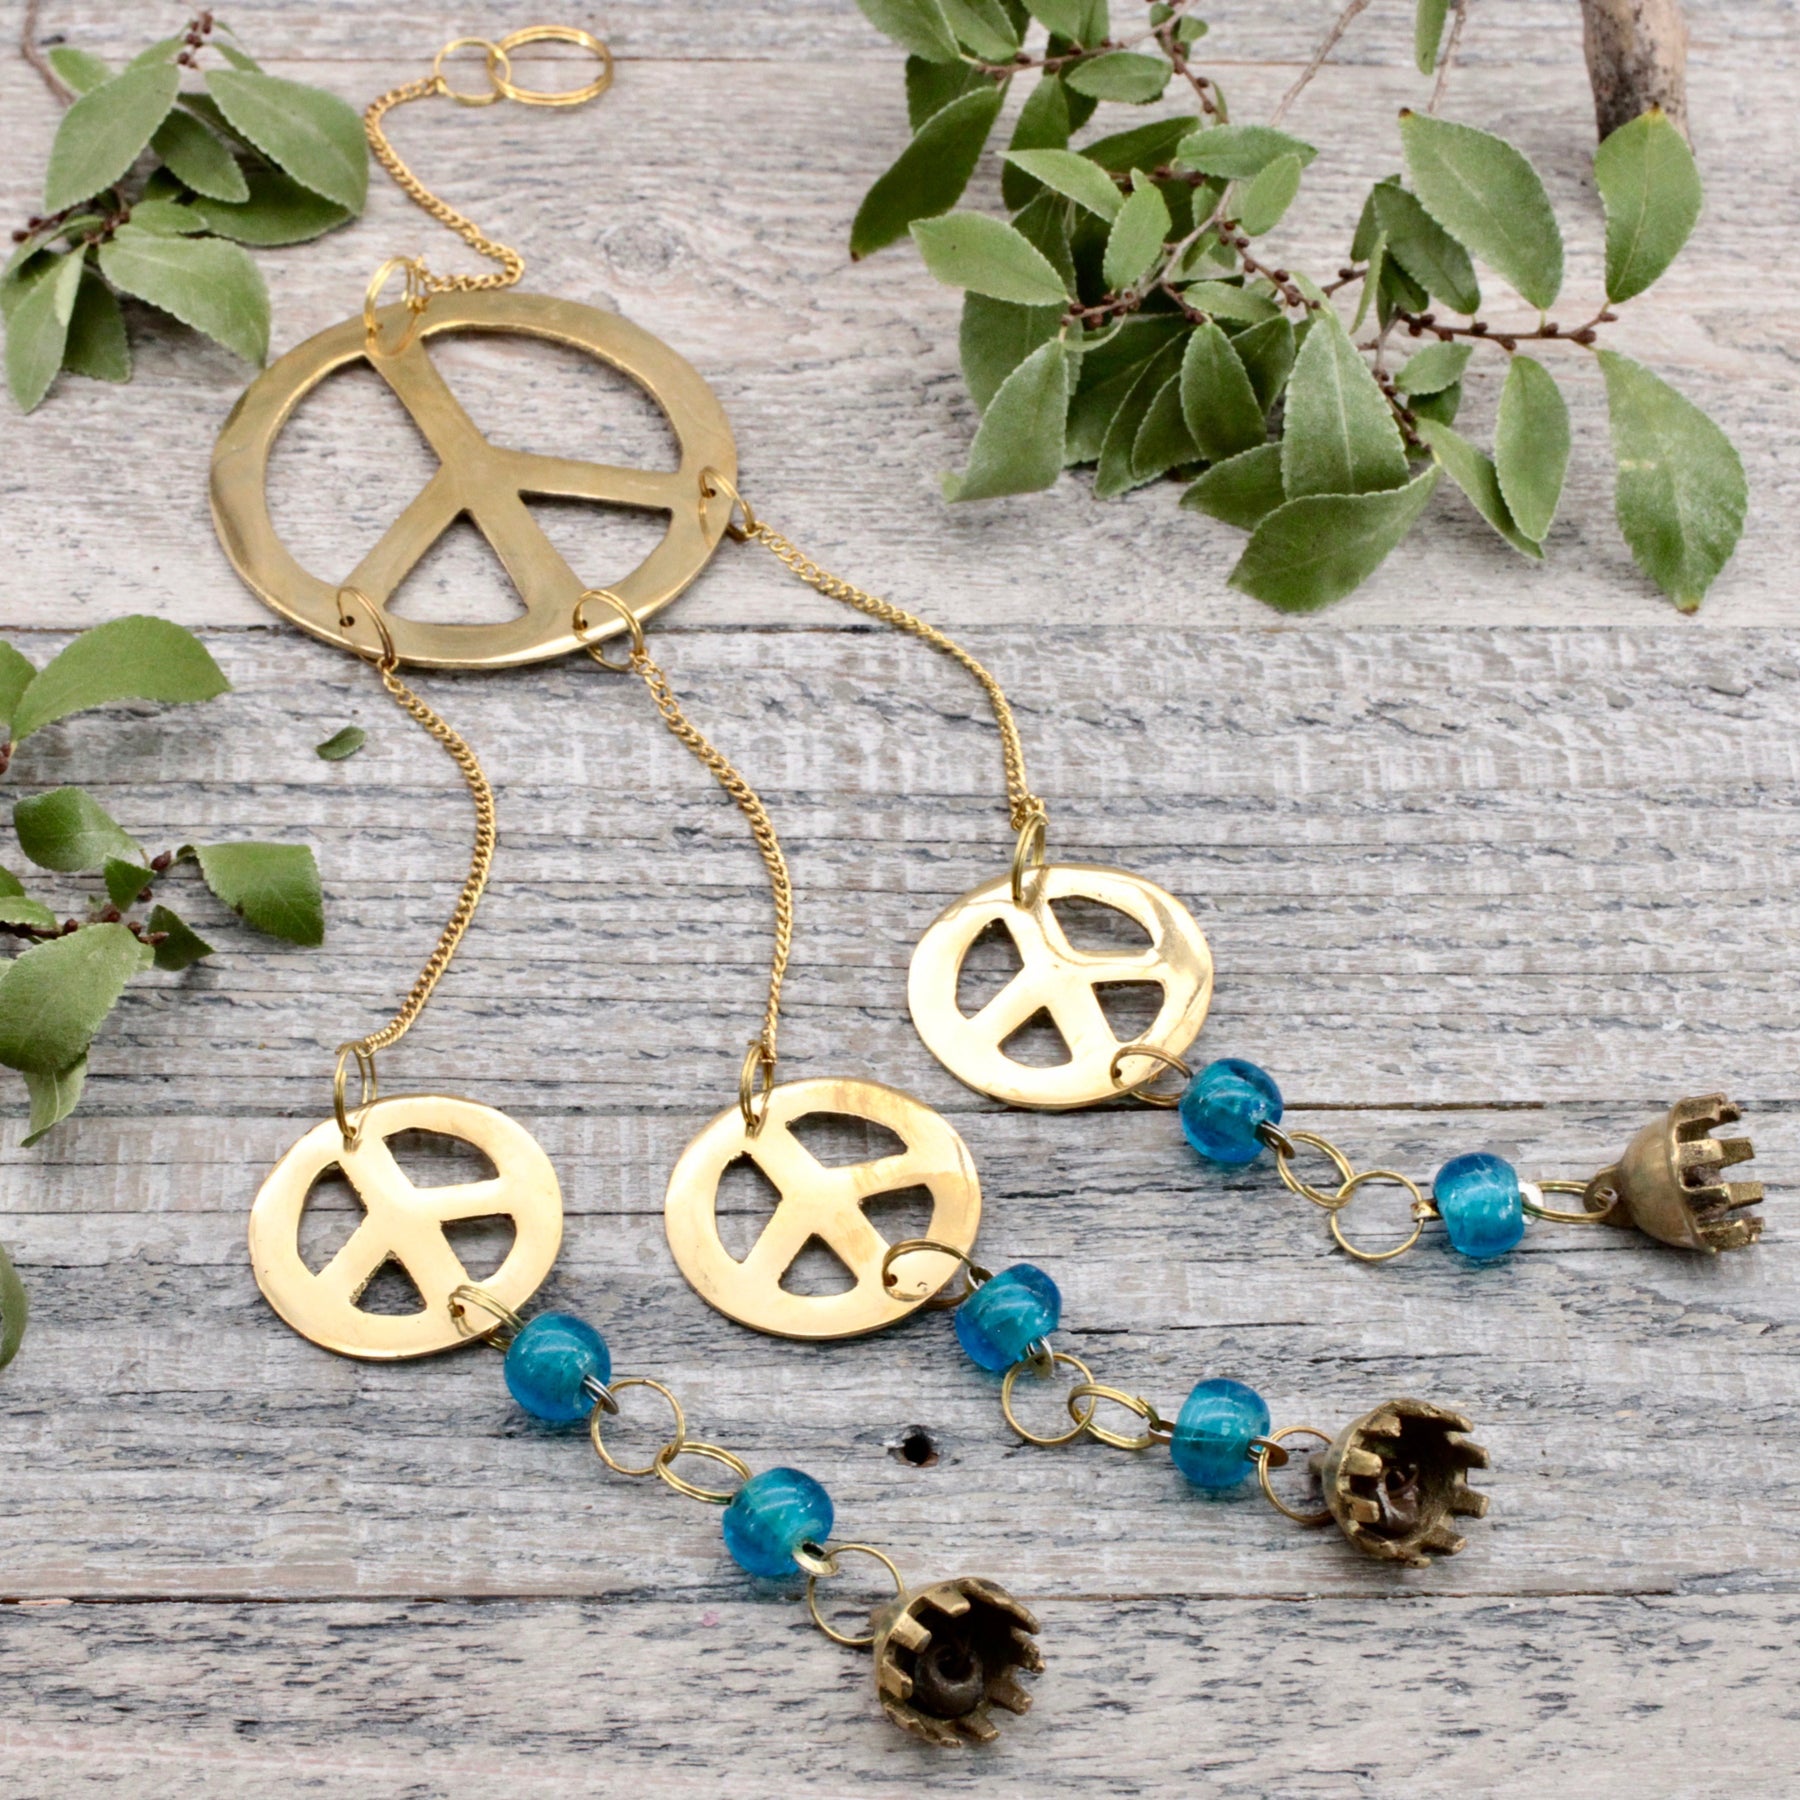 photo of peace sign wind chimes